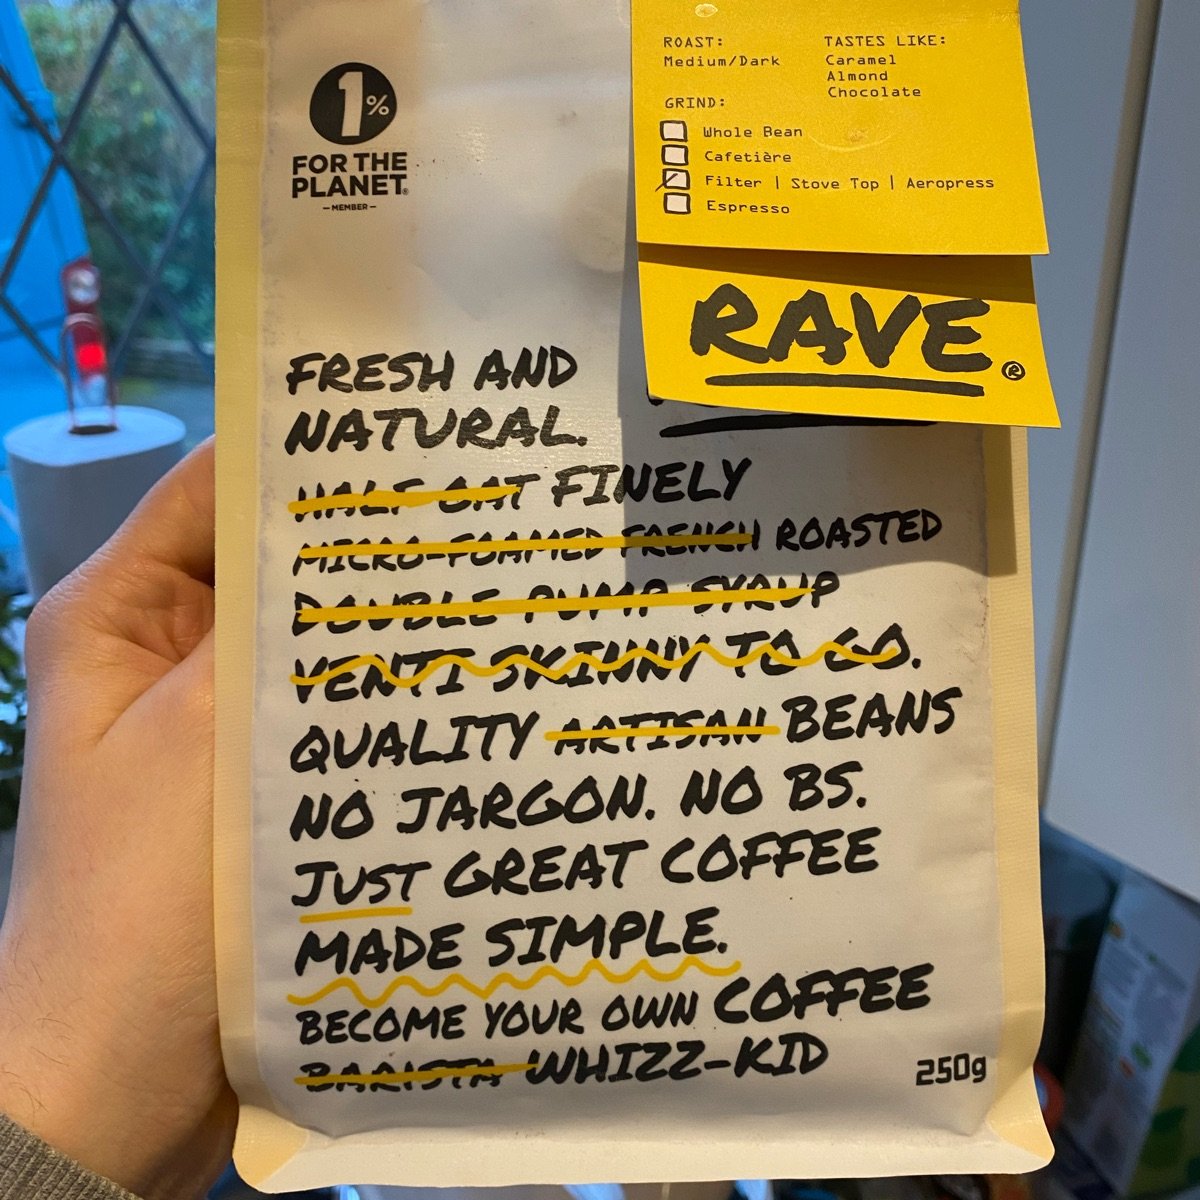 Rave coffee Signature Blend Reviews